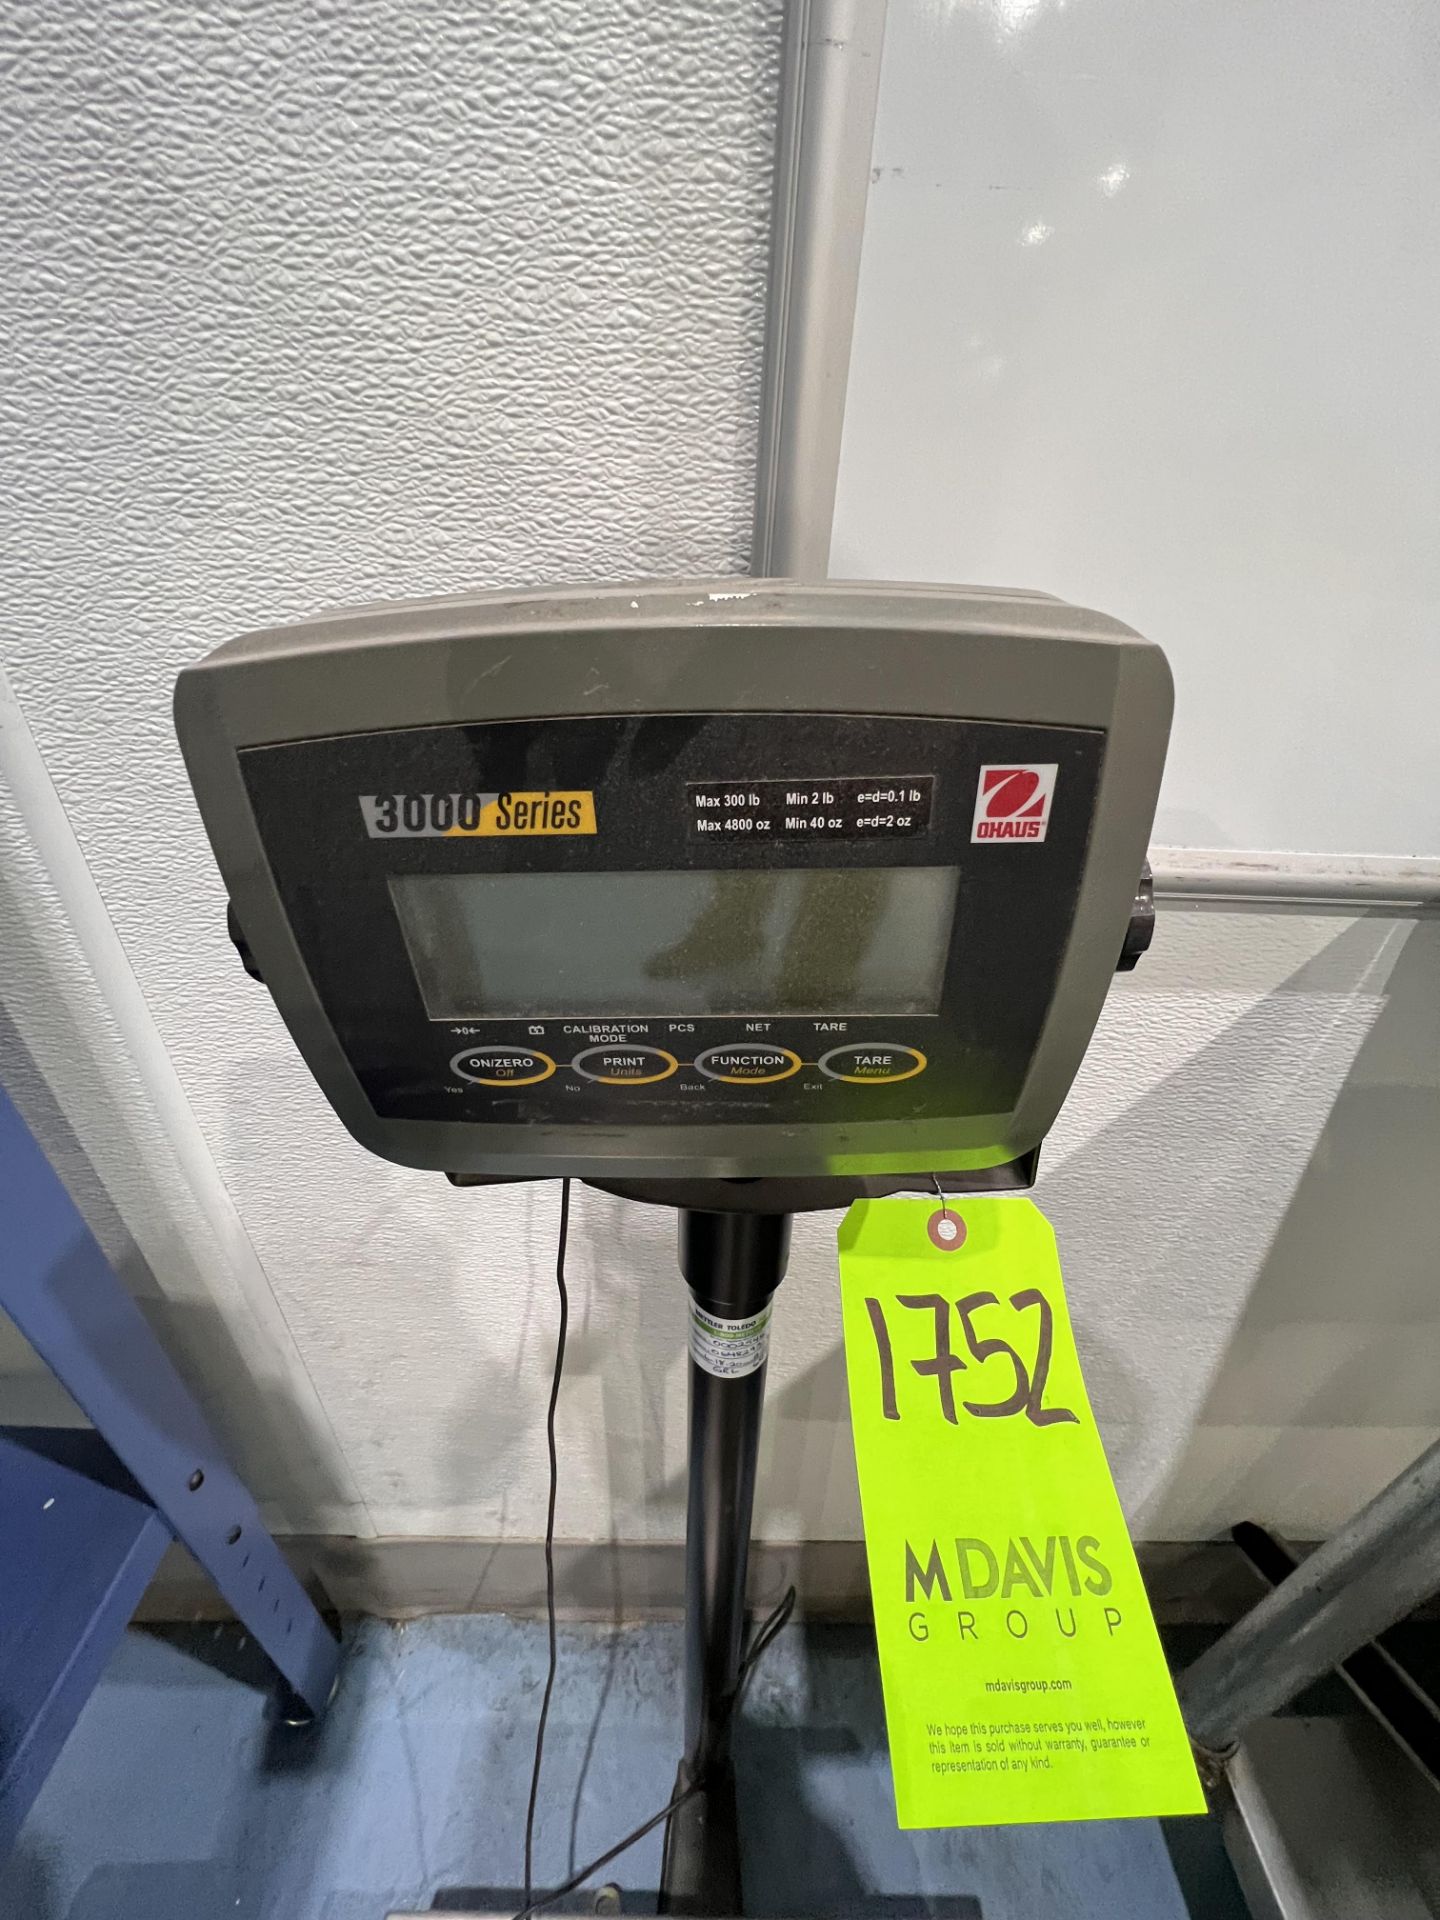 OHAUS  S/S COUNTERTOP SCALE, MODEL D150BL, WITH 3000 SERIES DIGITAL READOUT - Image 2 of 12